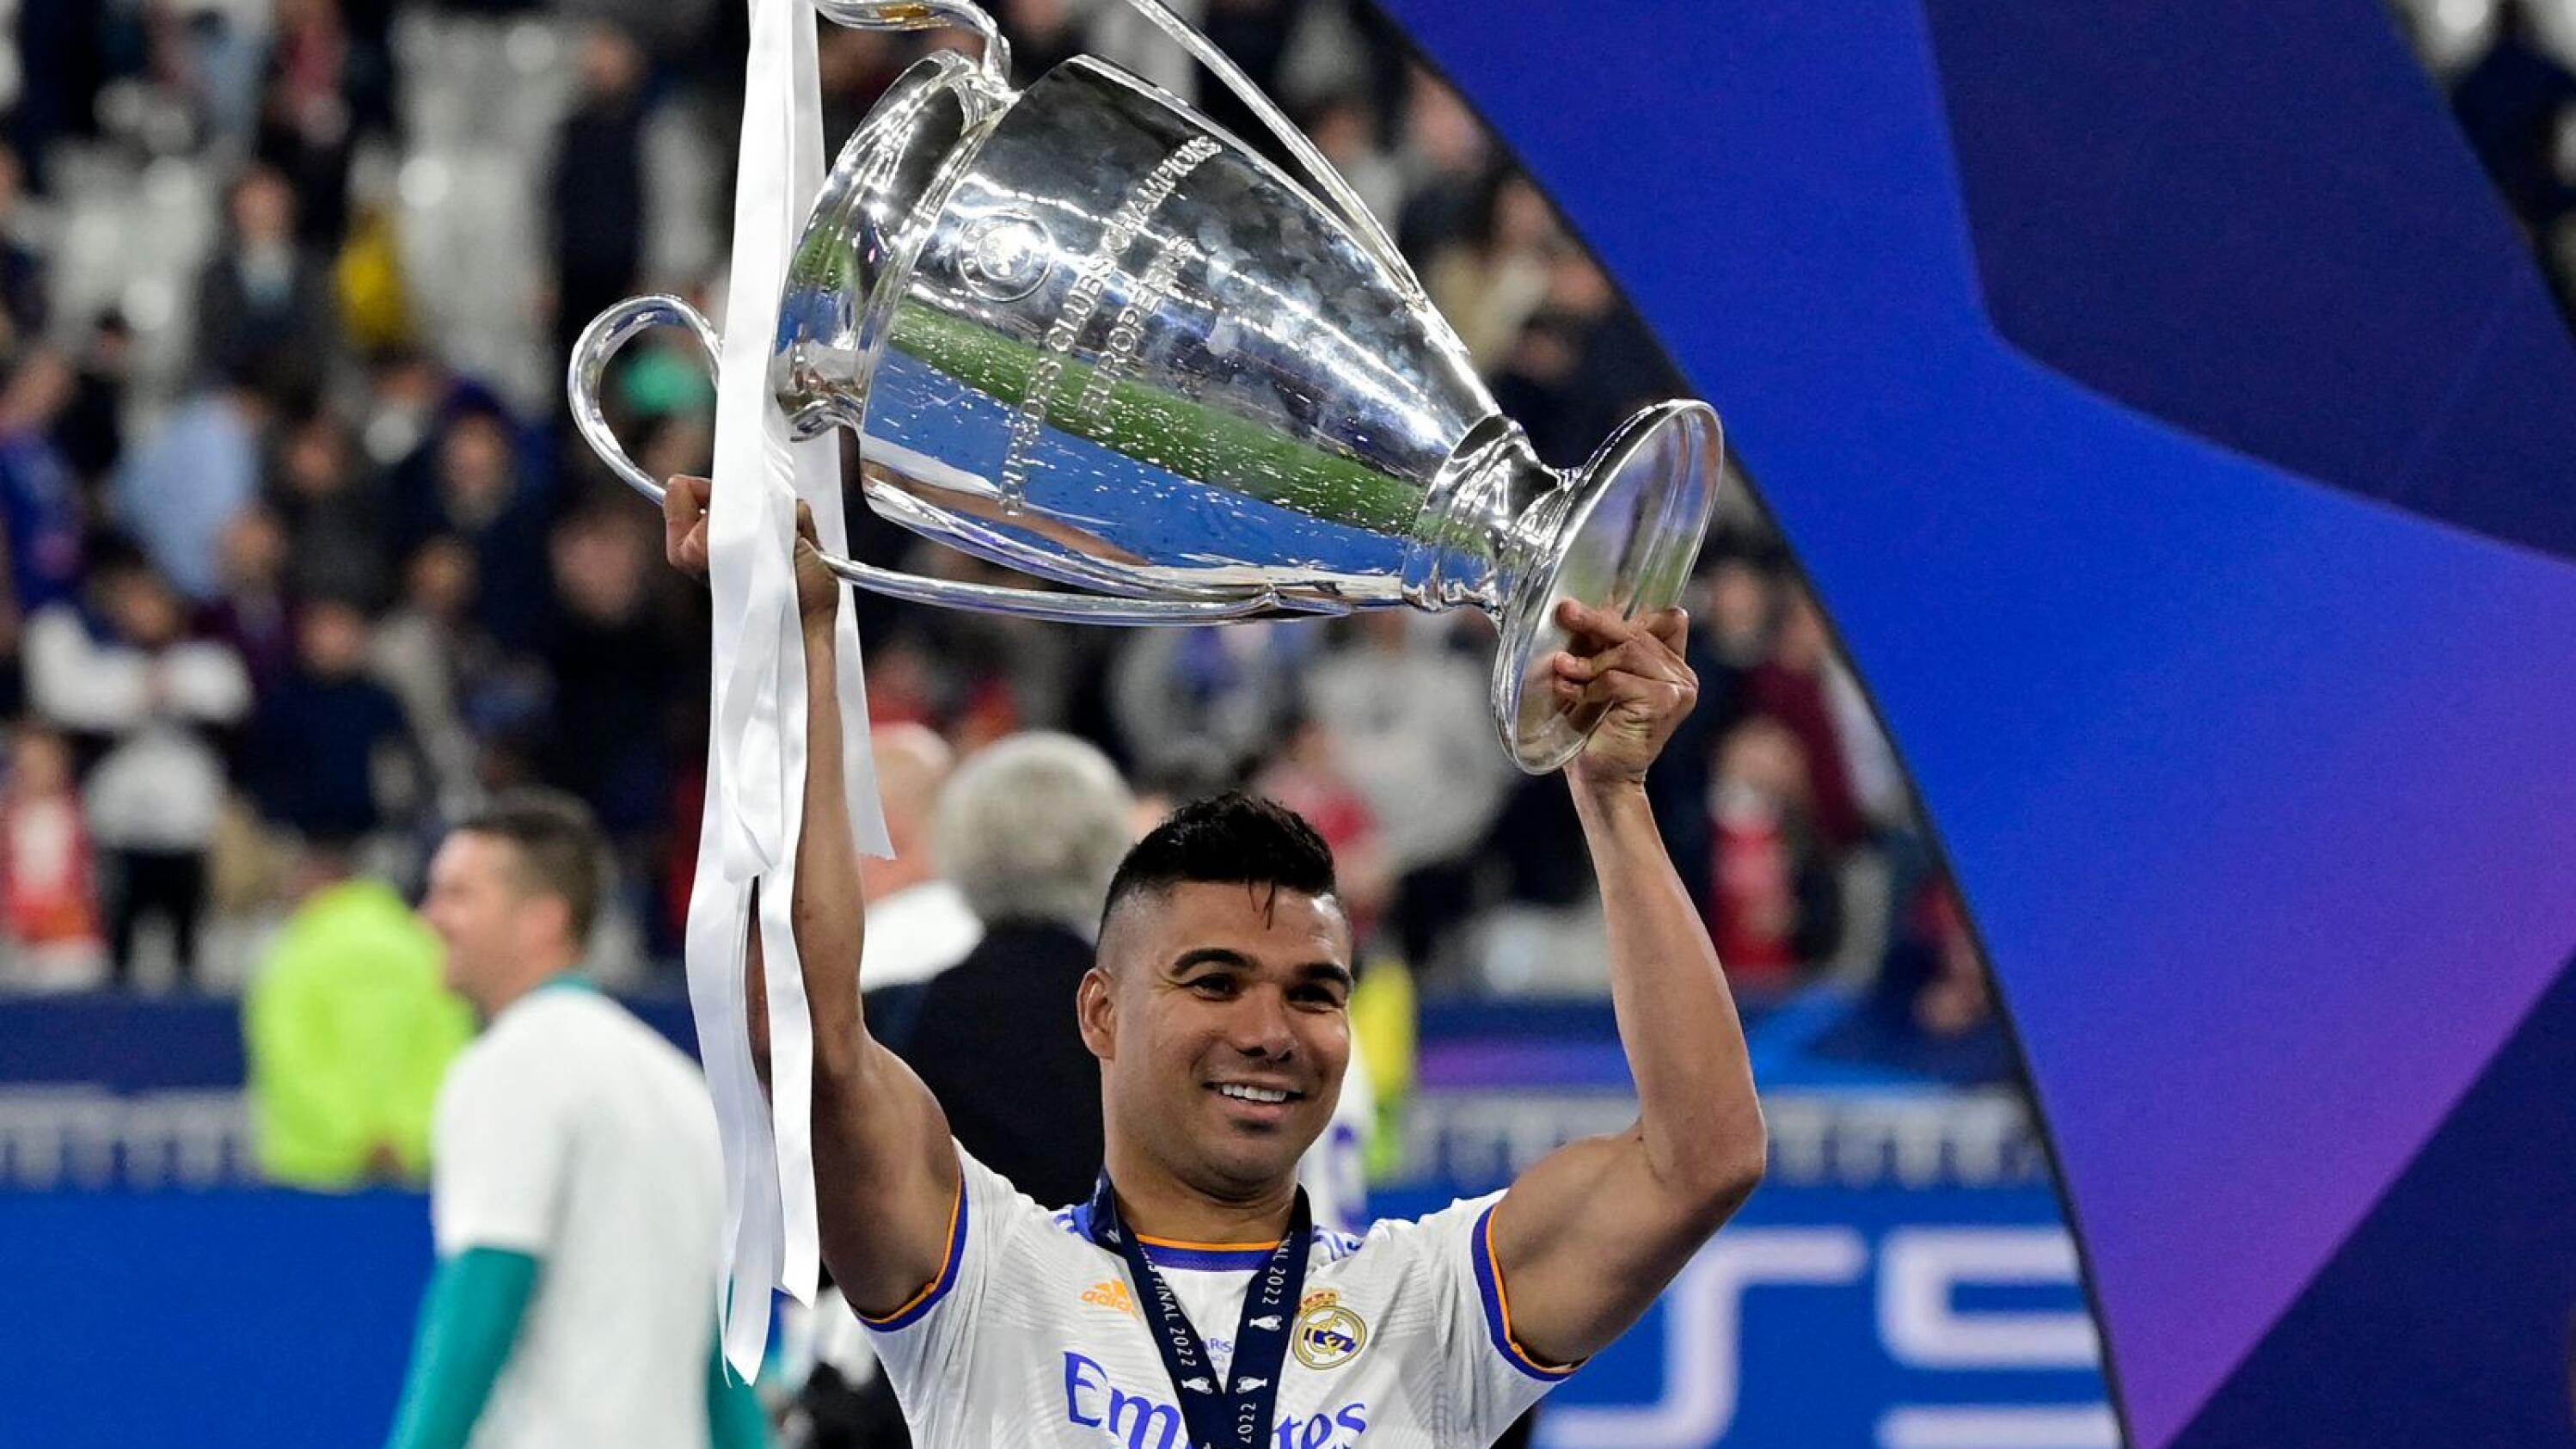 Former Real Madrid midfielder Casemiro celebrates with the Champions League trophy after they beat Liverpool in last season’s final at Stade de France in Saint-Denis